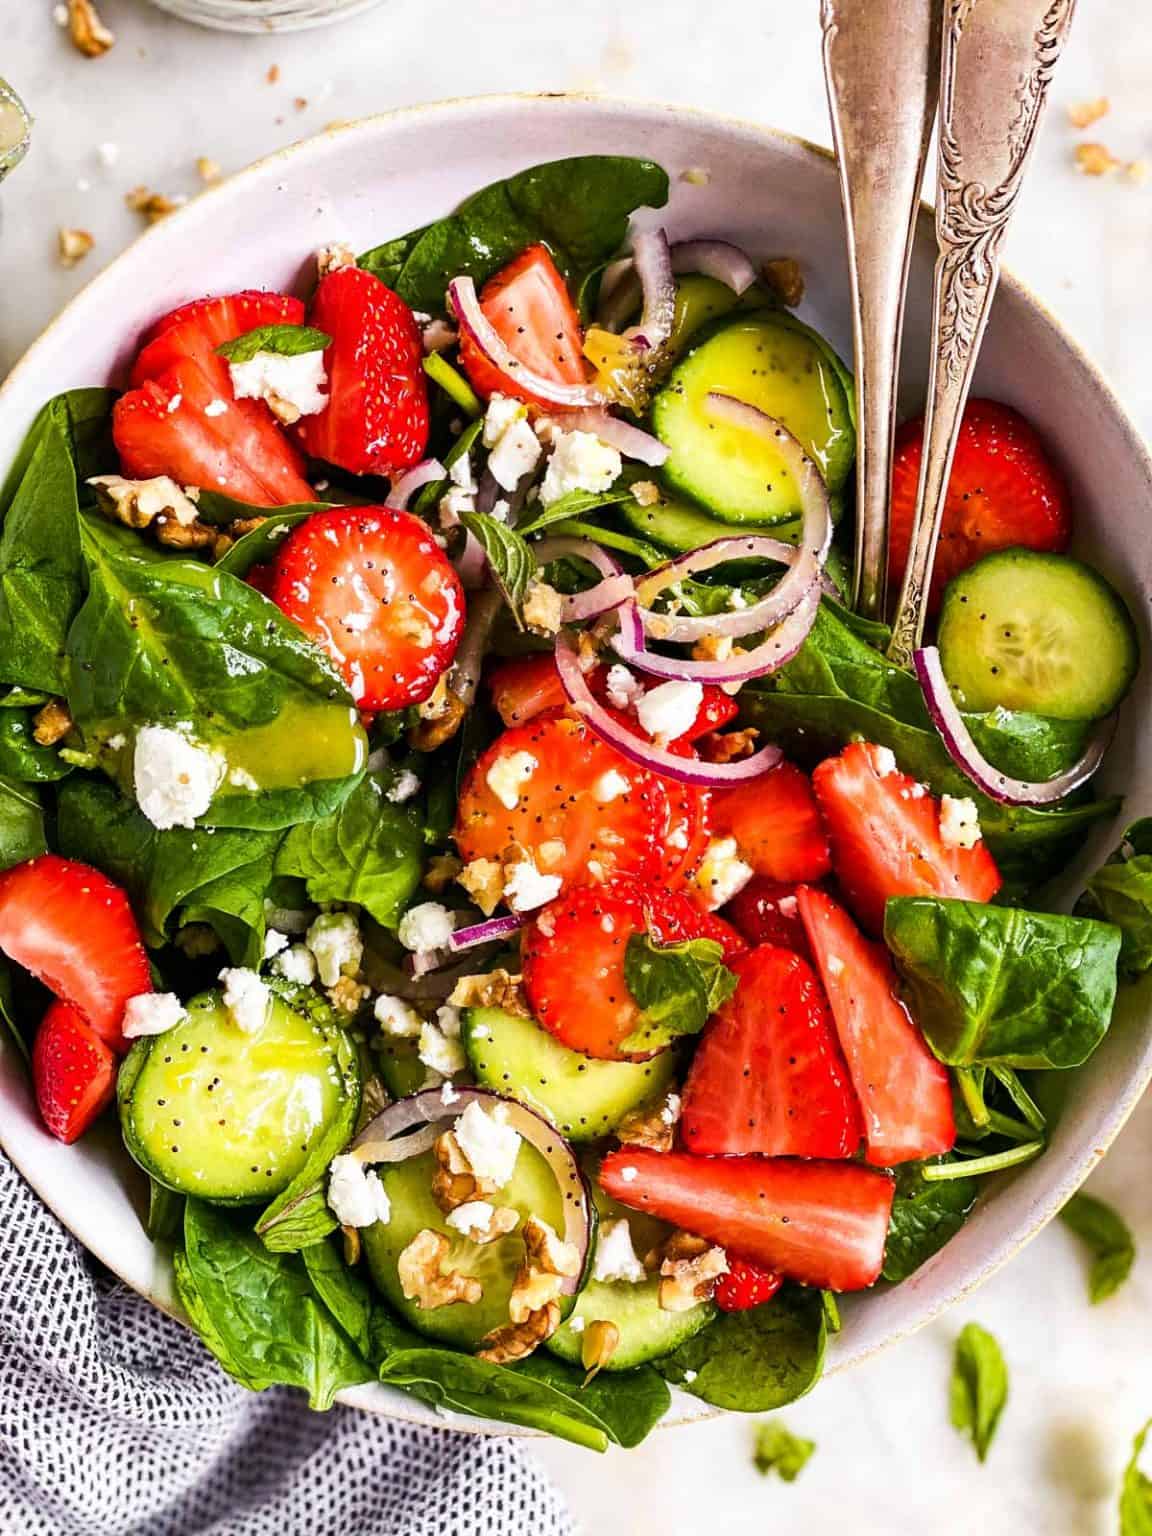 Strawberry Spinach Salad with Poppy Seed Dressing Recipe - Savory Nothings